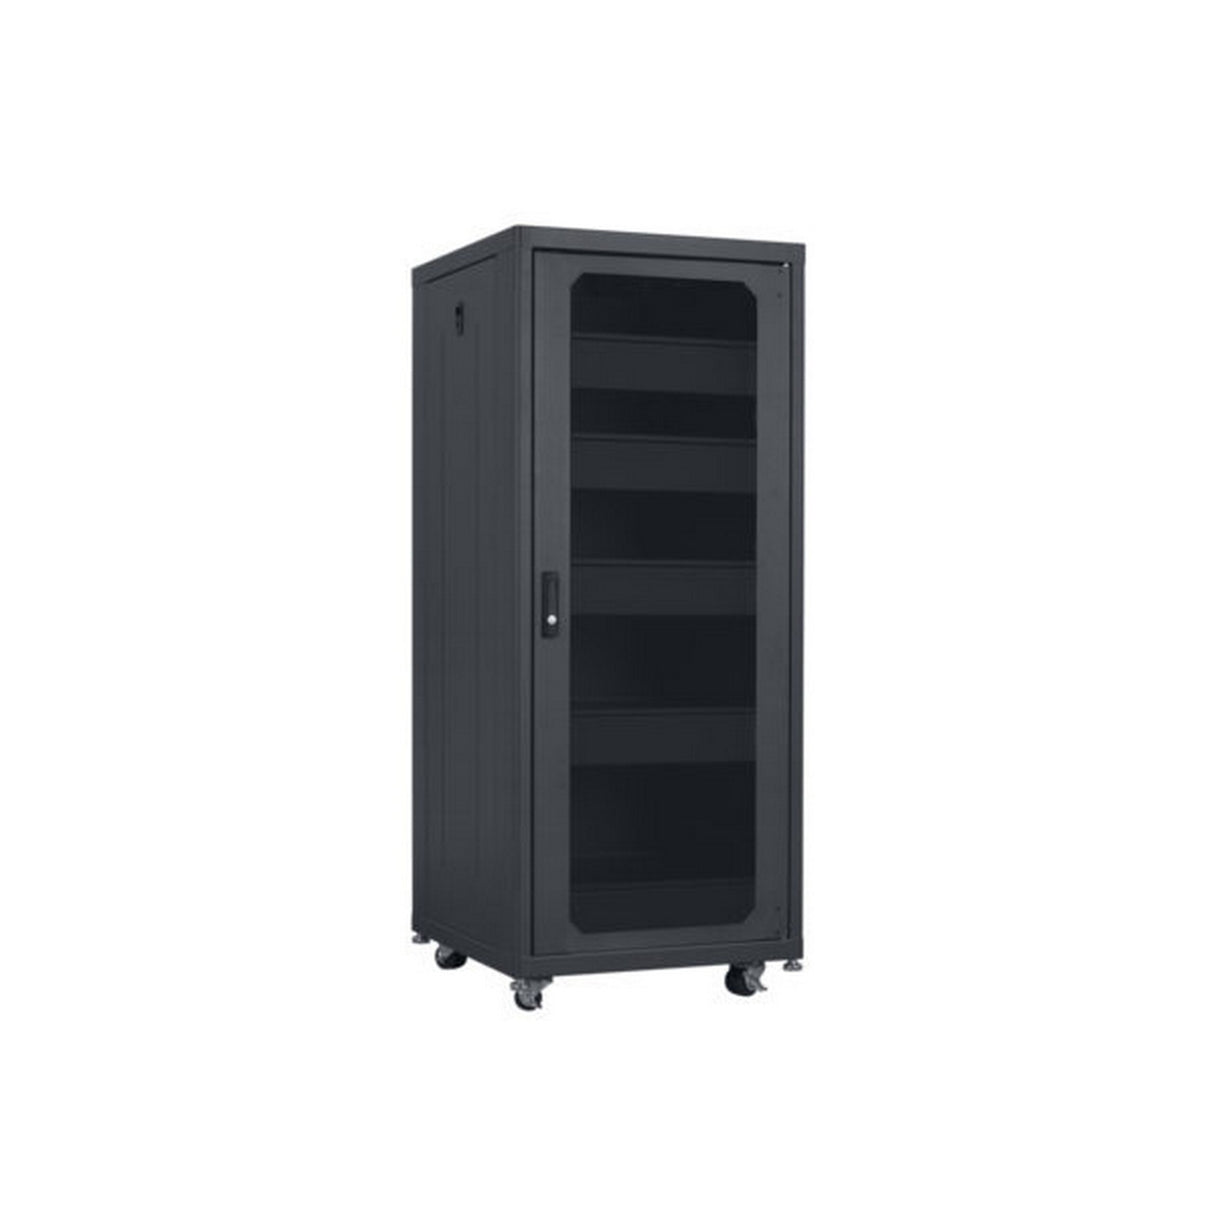 Lowell LCDR-2724 Configured Design Rack, 27 x 24 Inch